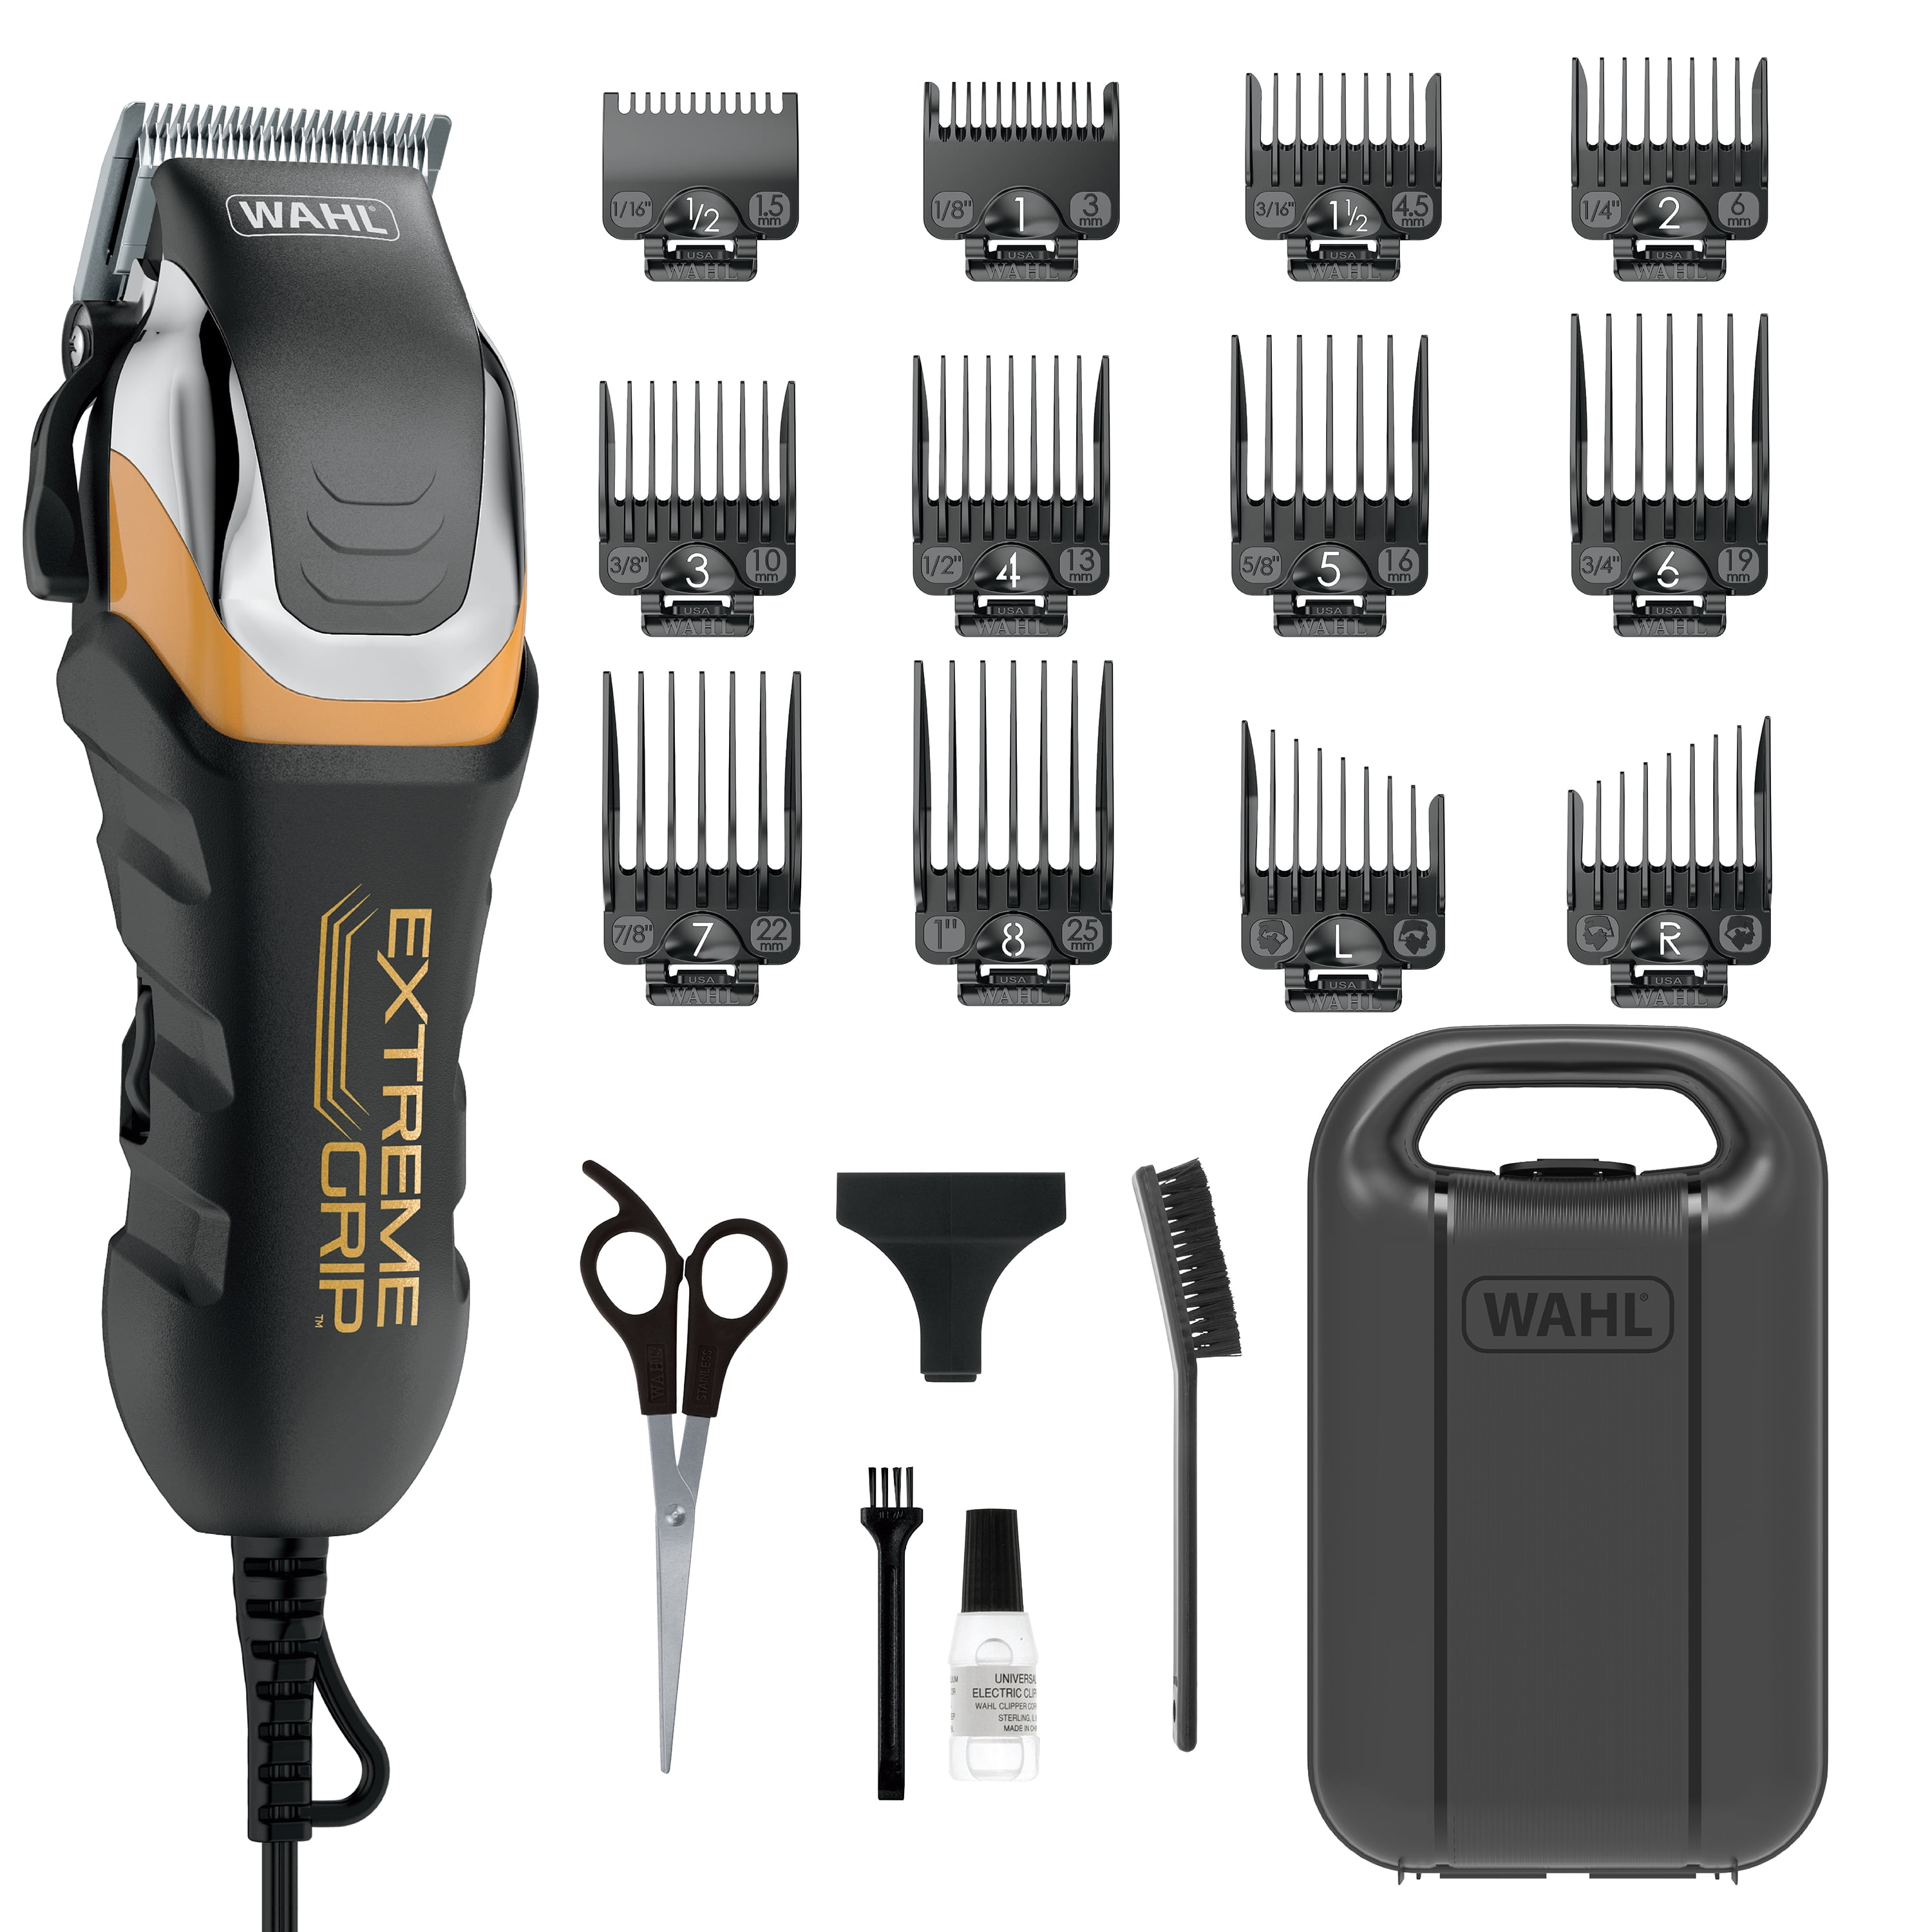 Wahl Extreme Grip Pro Corded Hair Clipper for Men or Women, Rugged